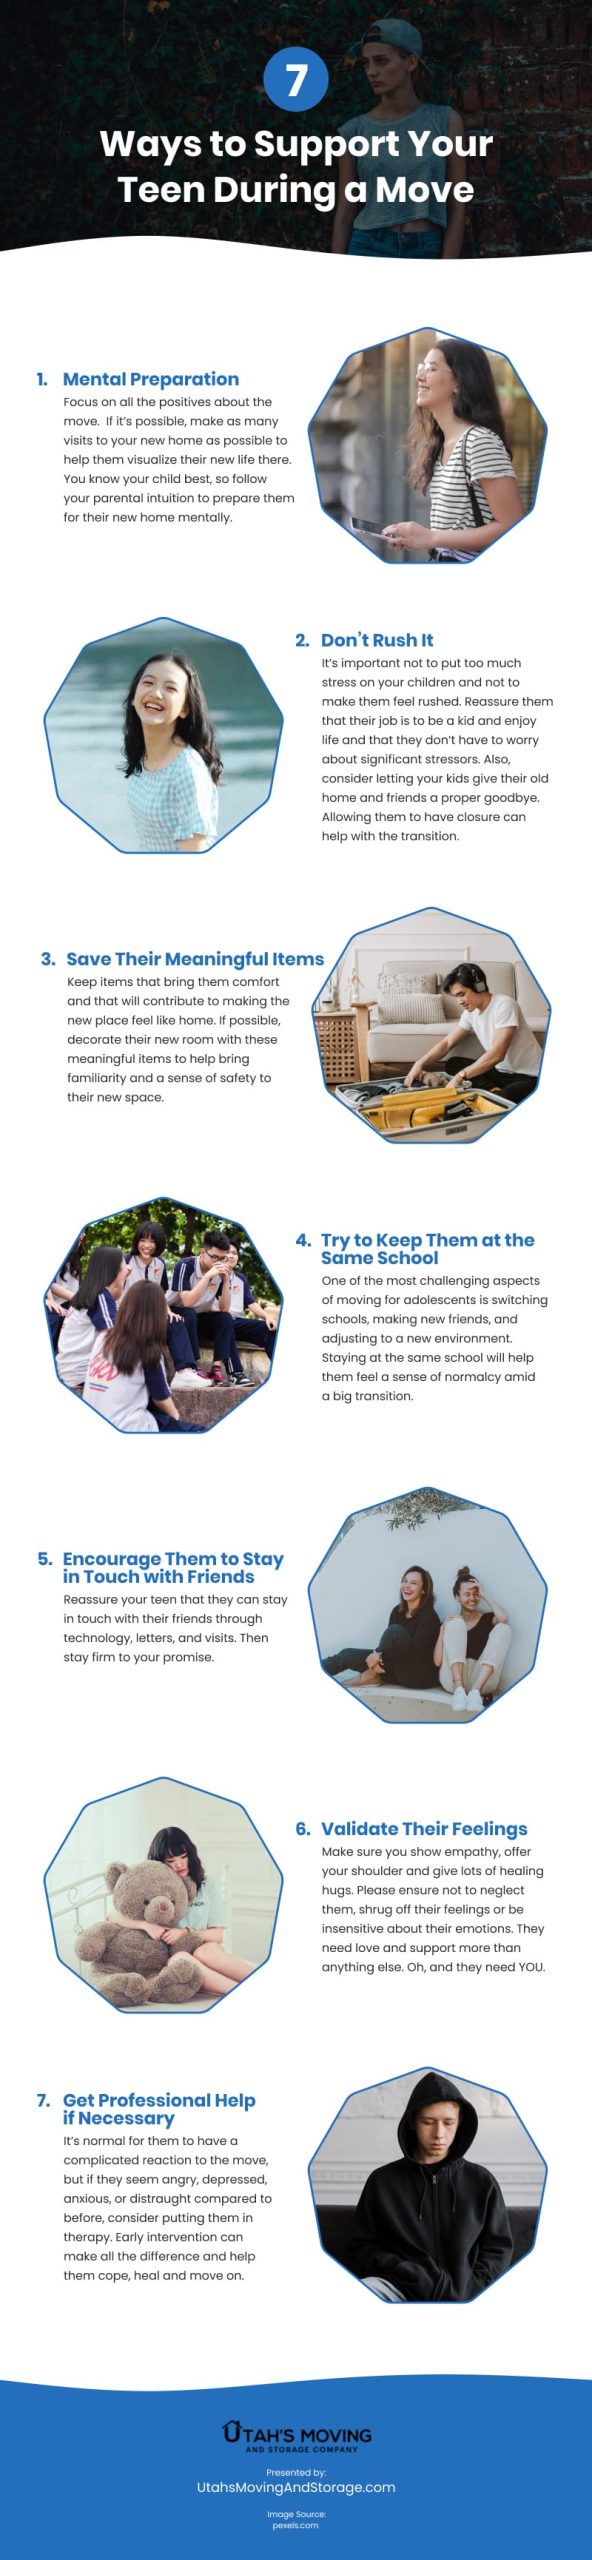 7 Ways to Support Your Teen During a Move Infographic